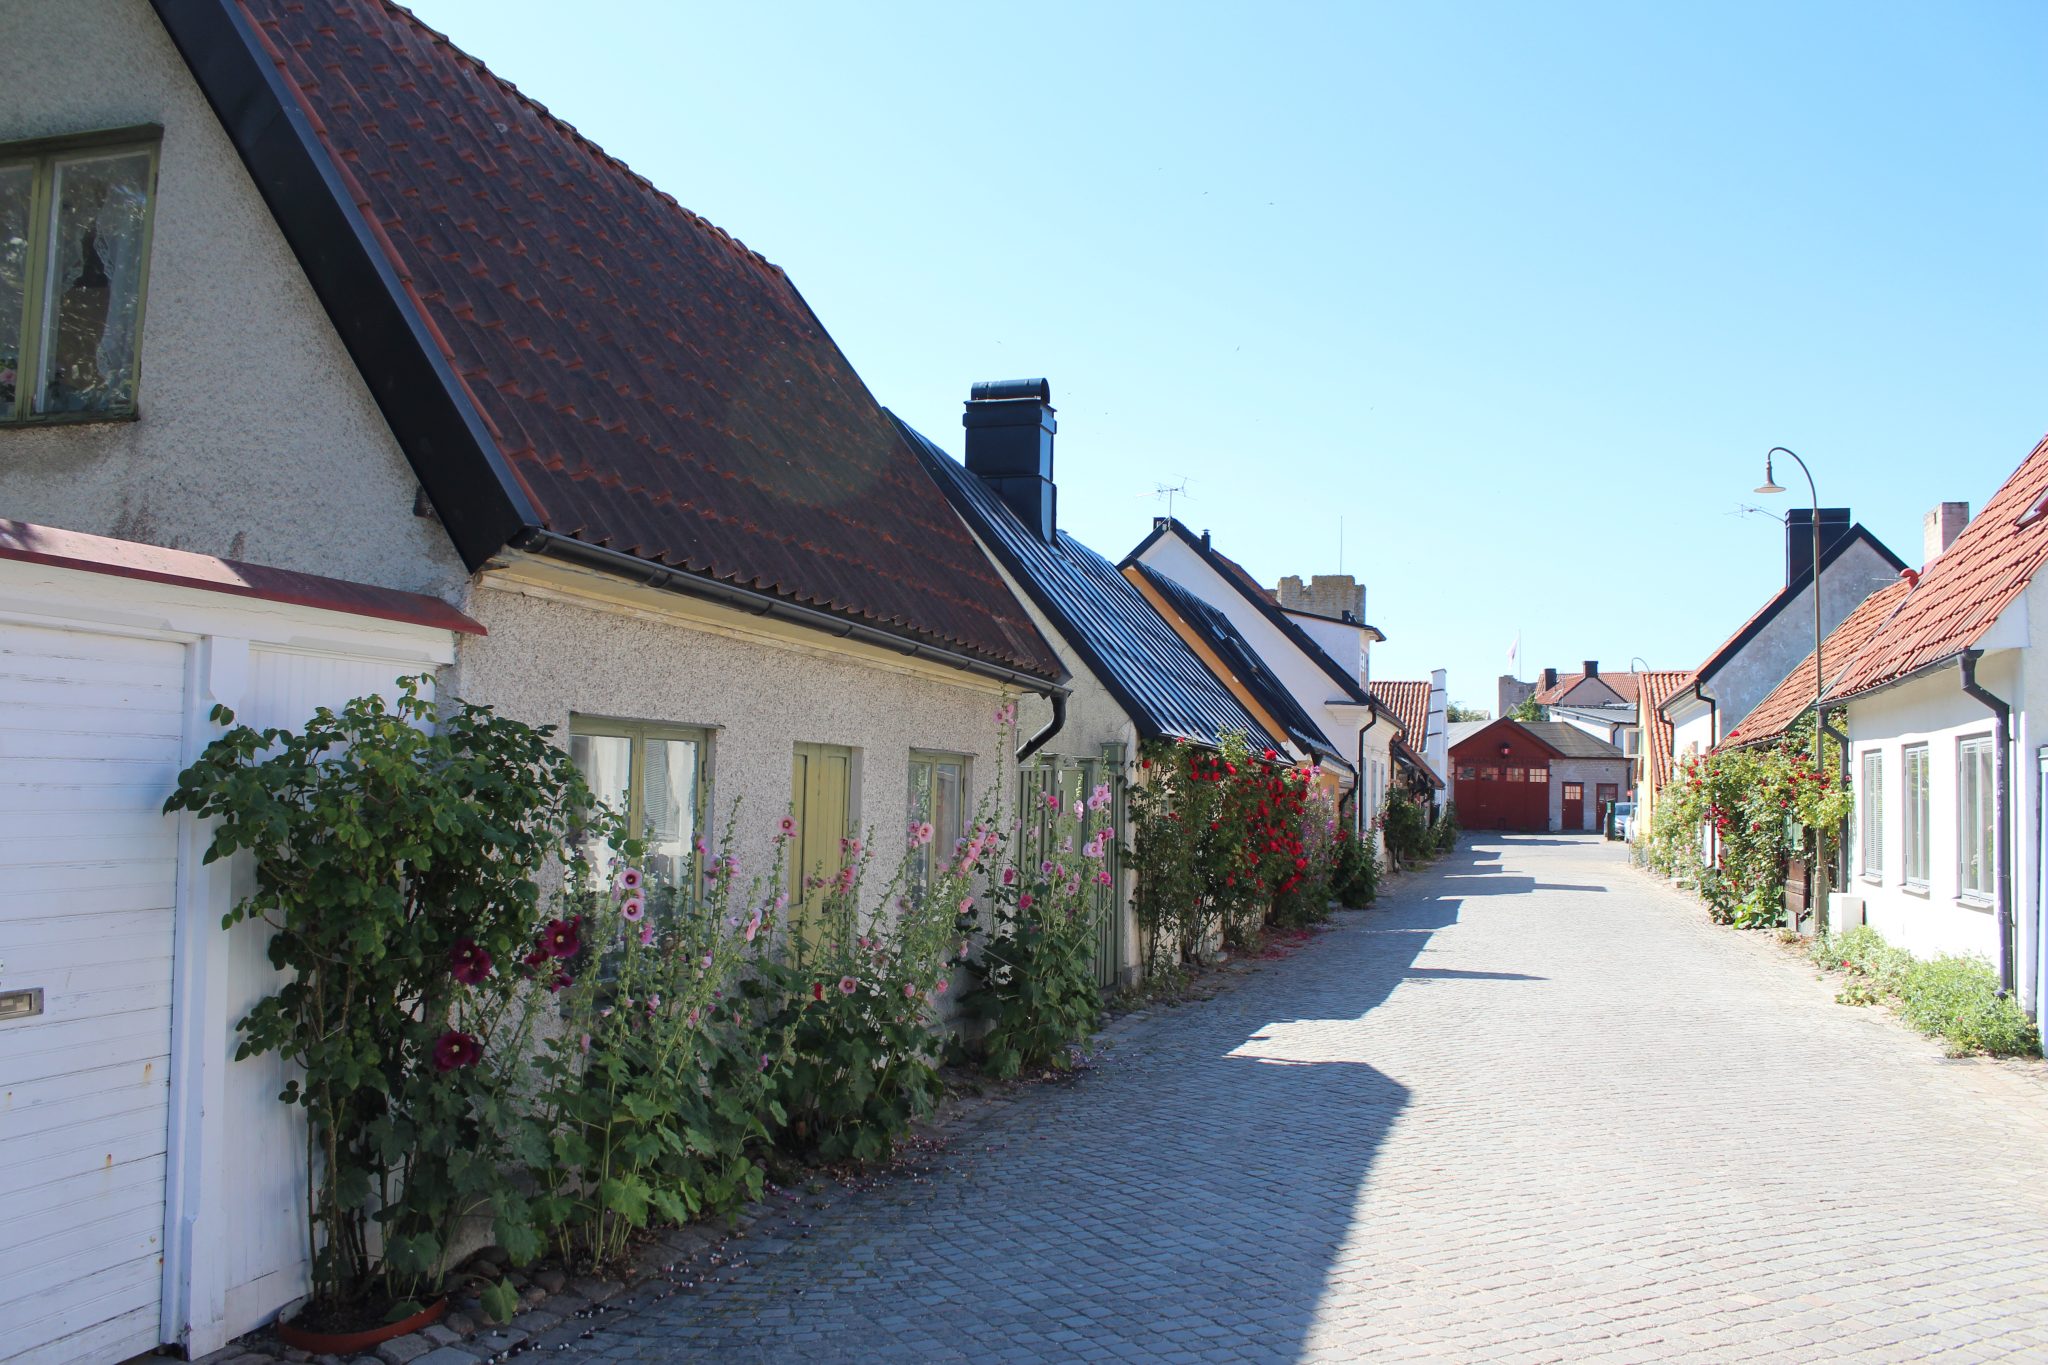 Old town of Visby, the city of roses, and other flowers too.